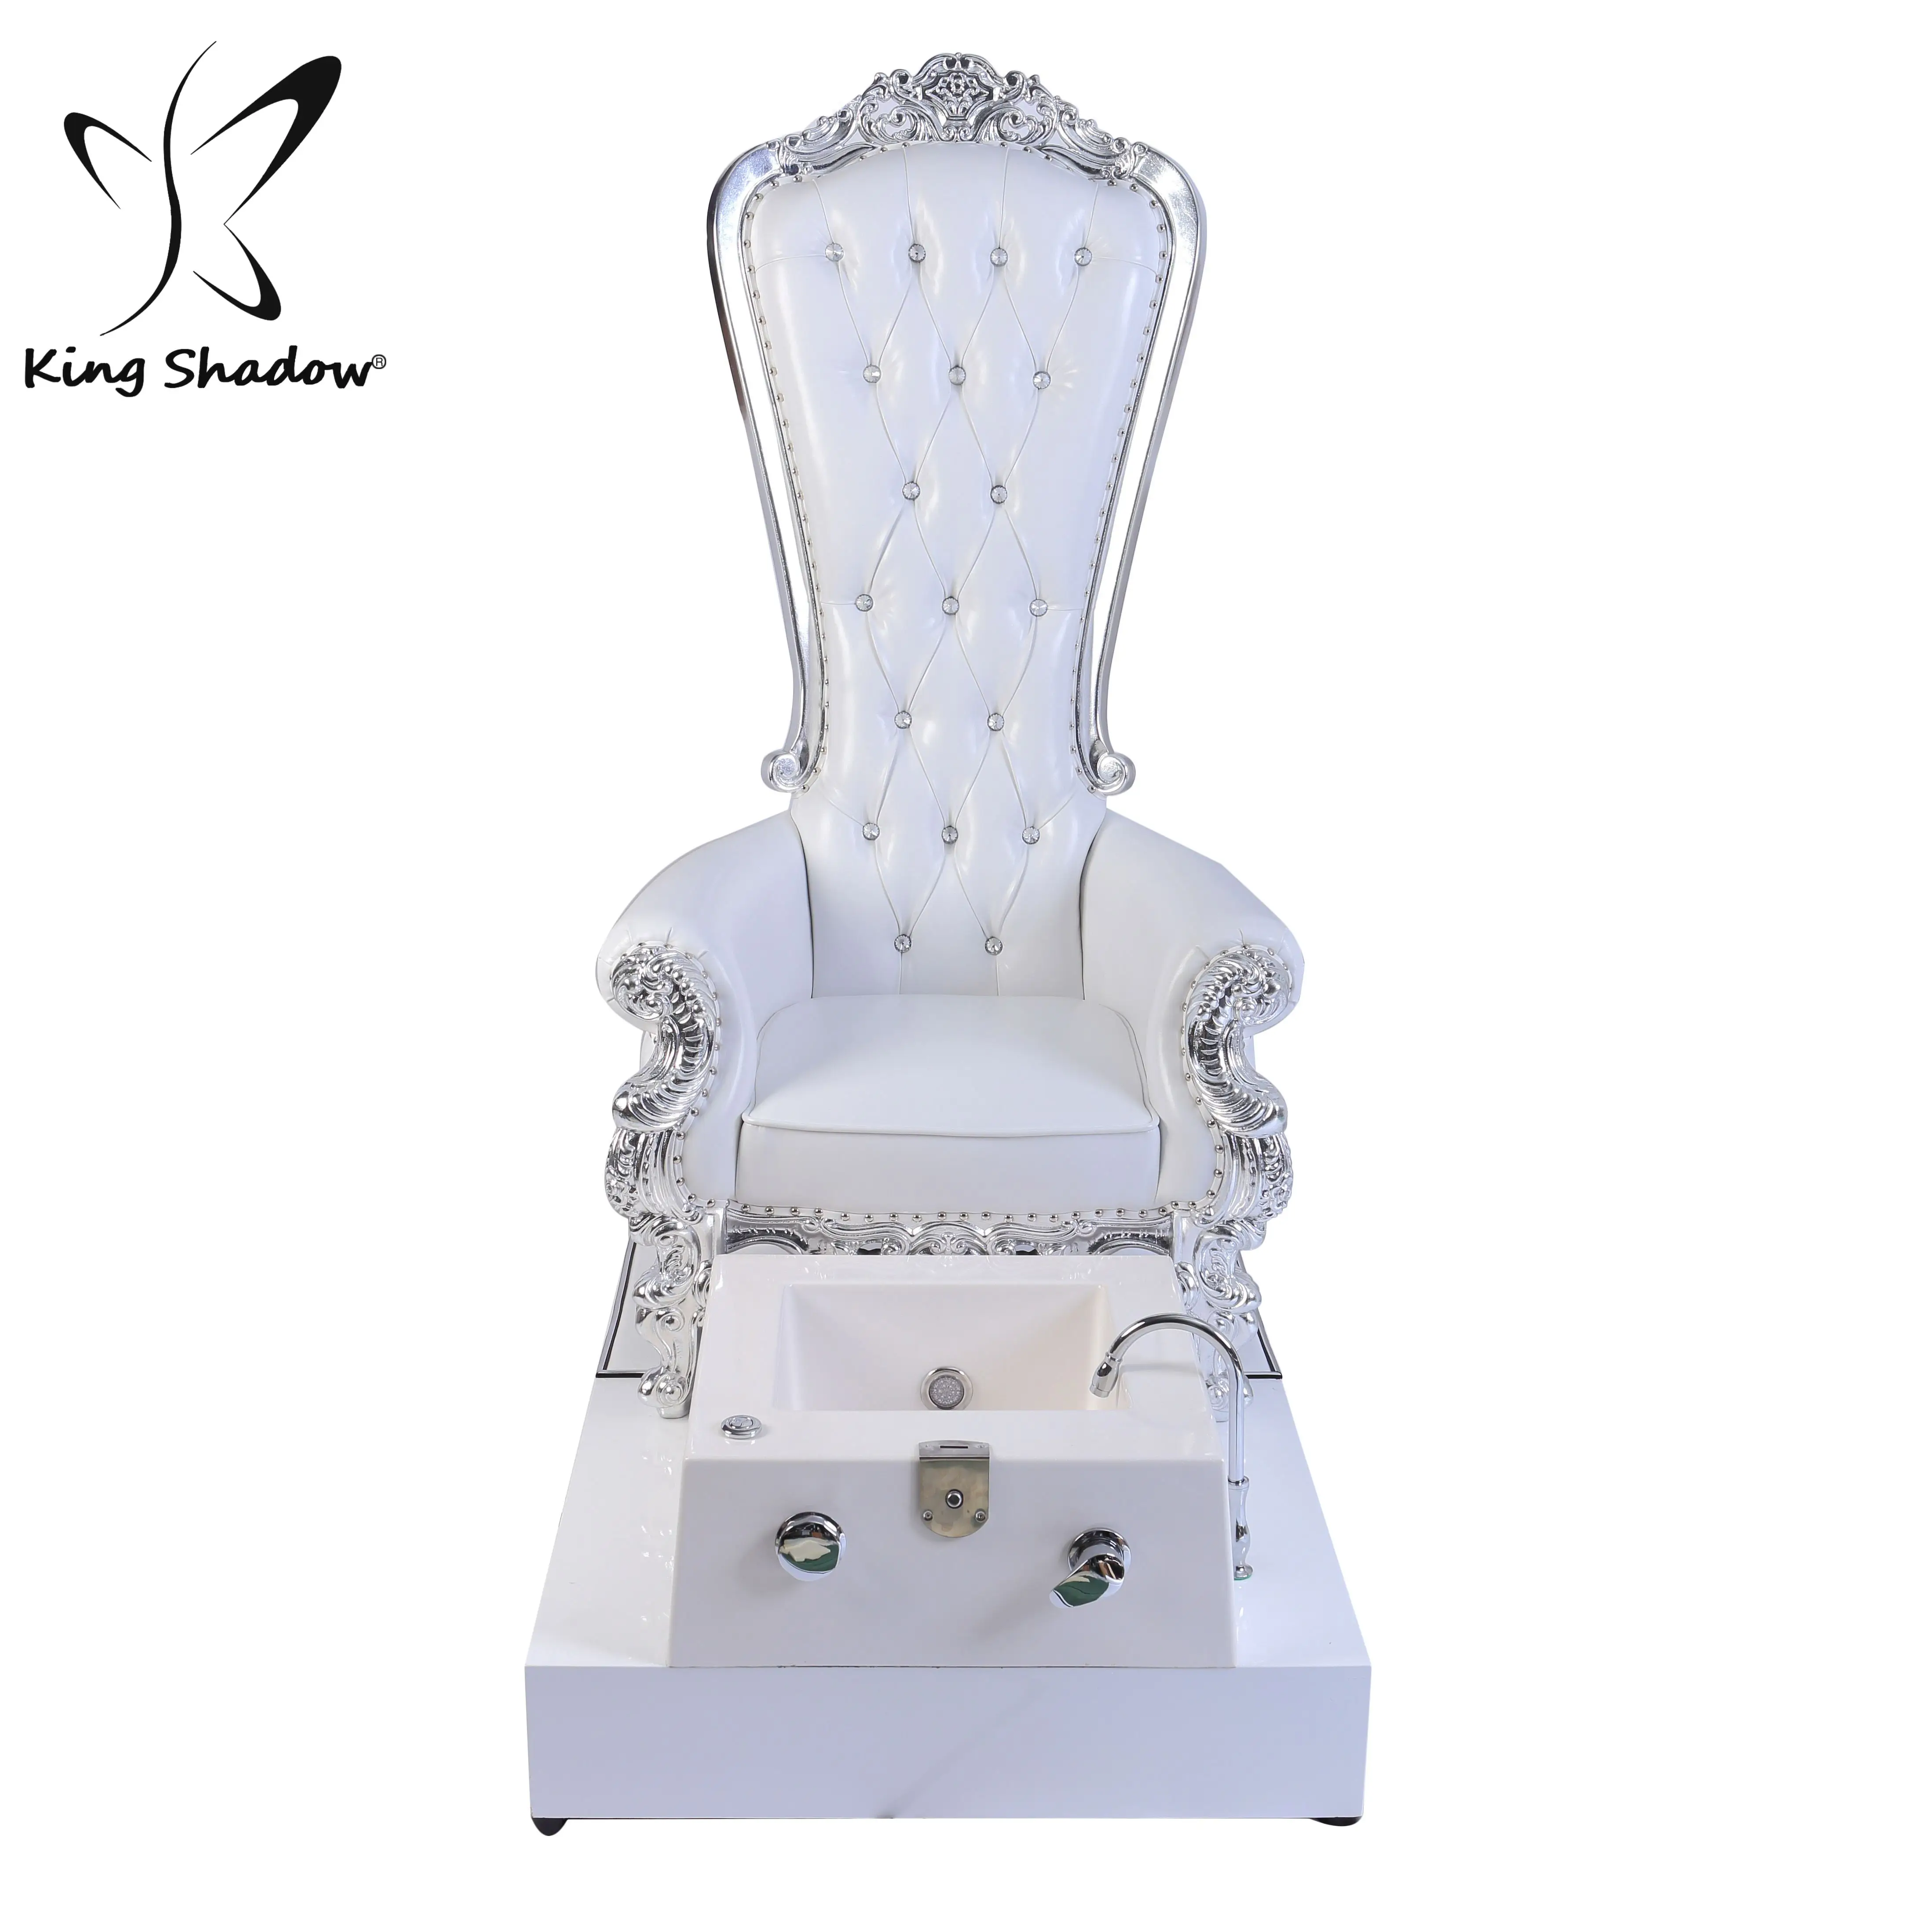 

Nails salon equipment luxury foot spa massage chair station nail manicure pedicure chair with tub, Optional